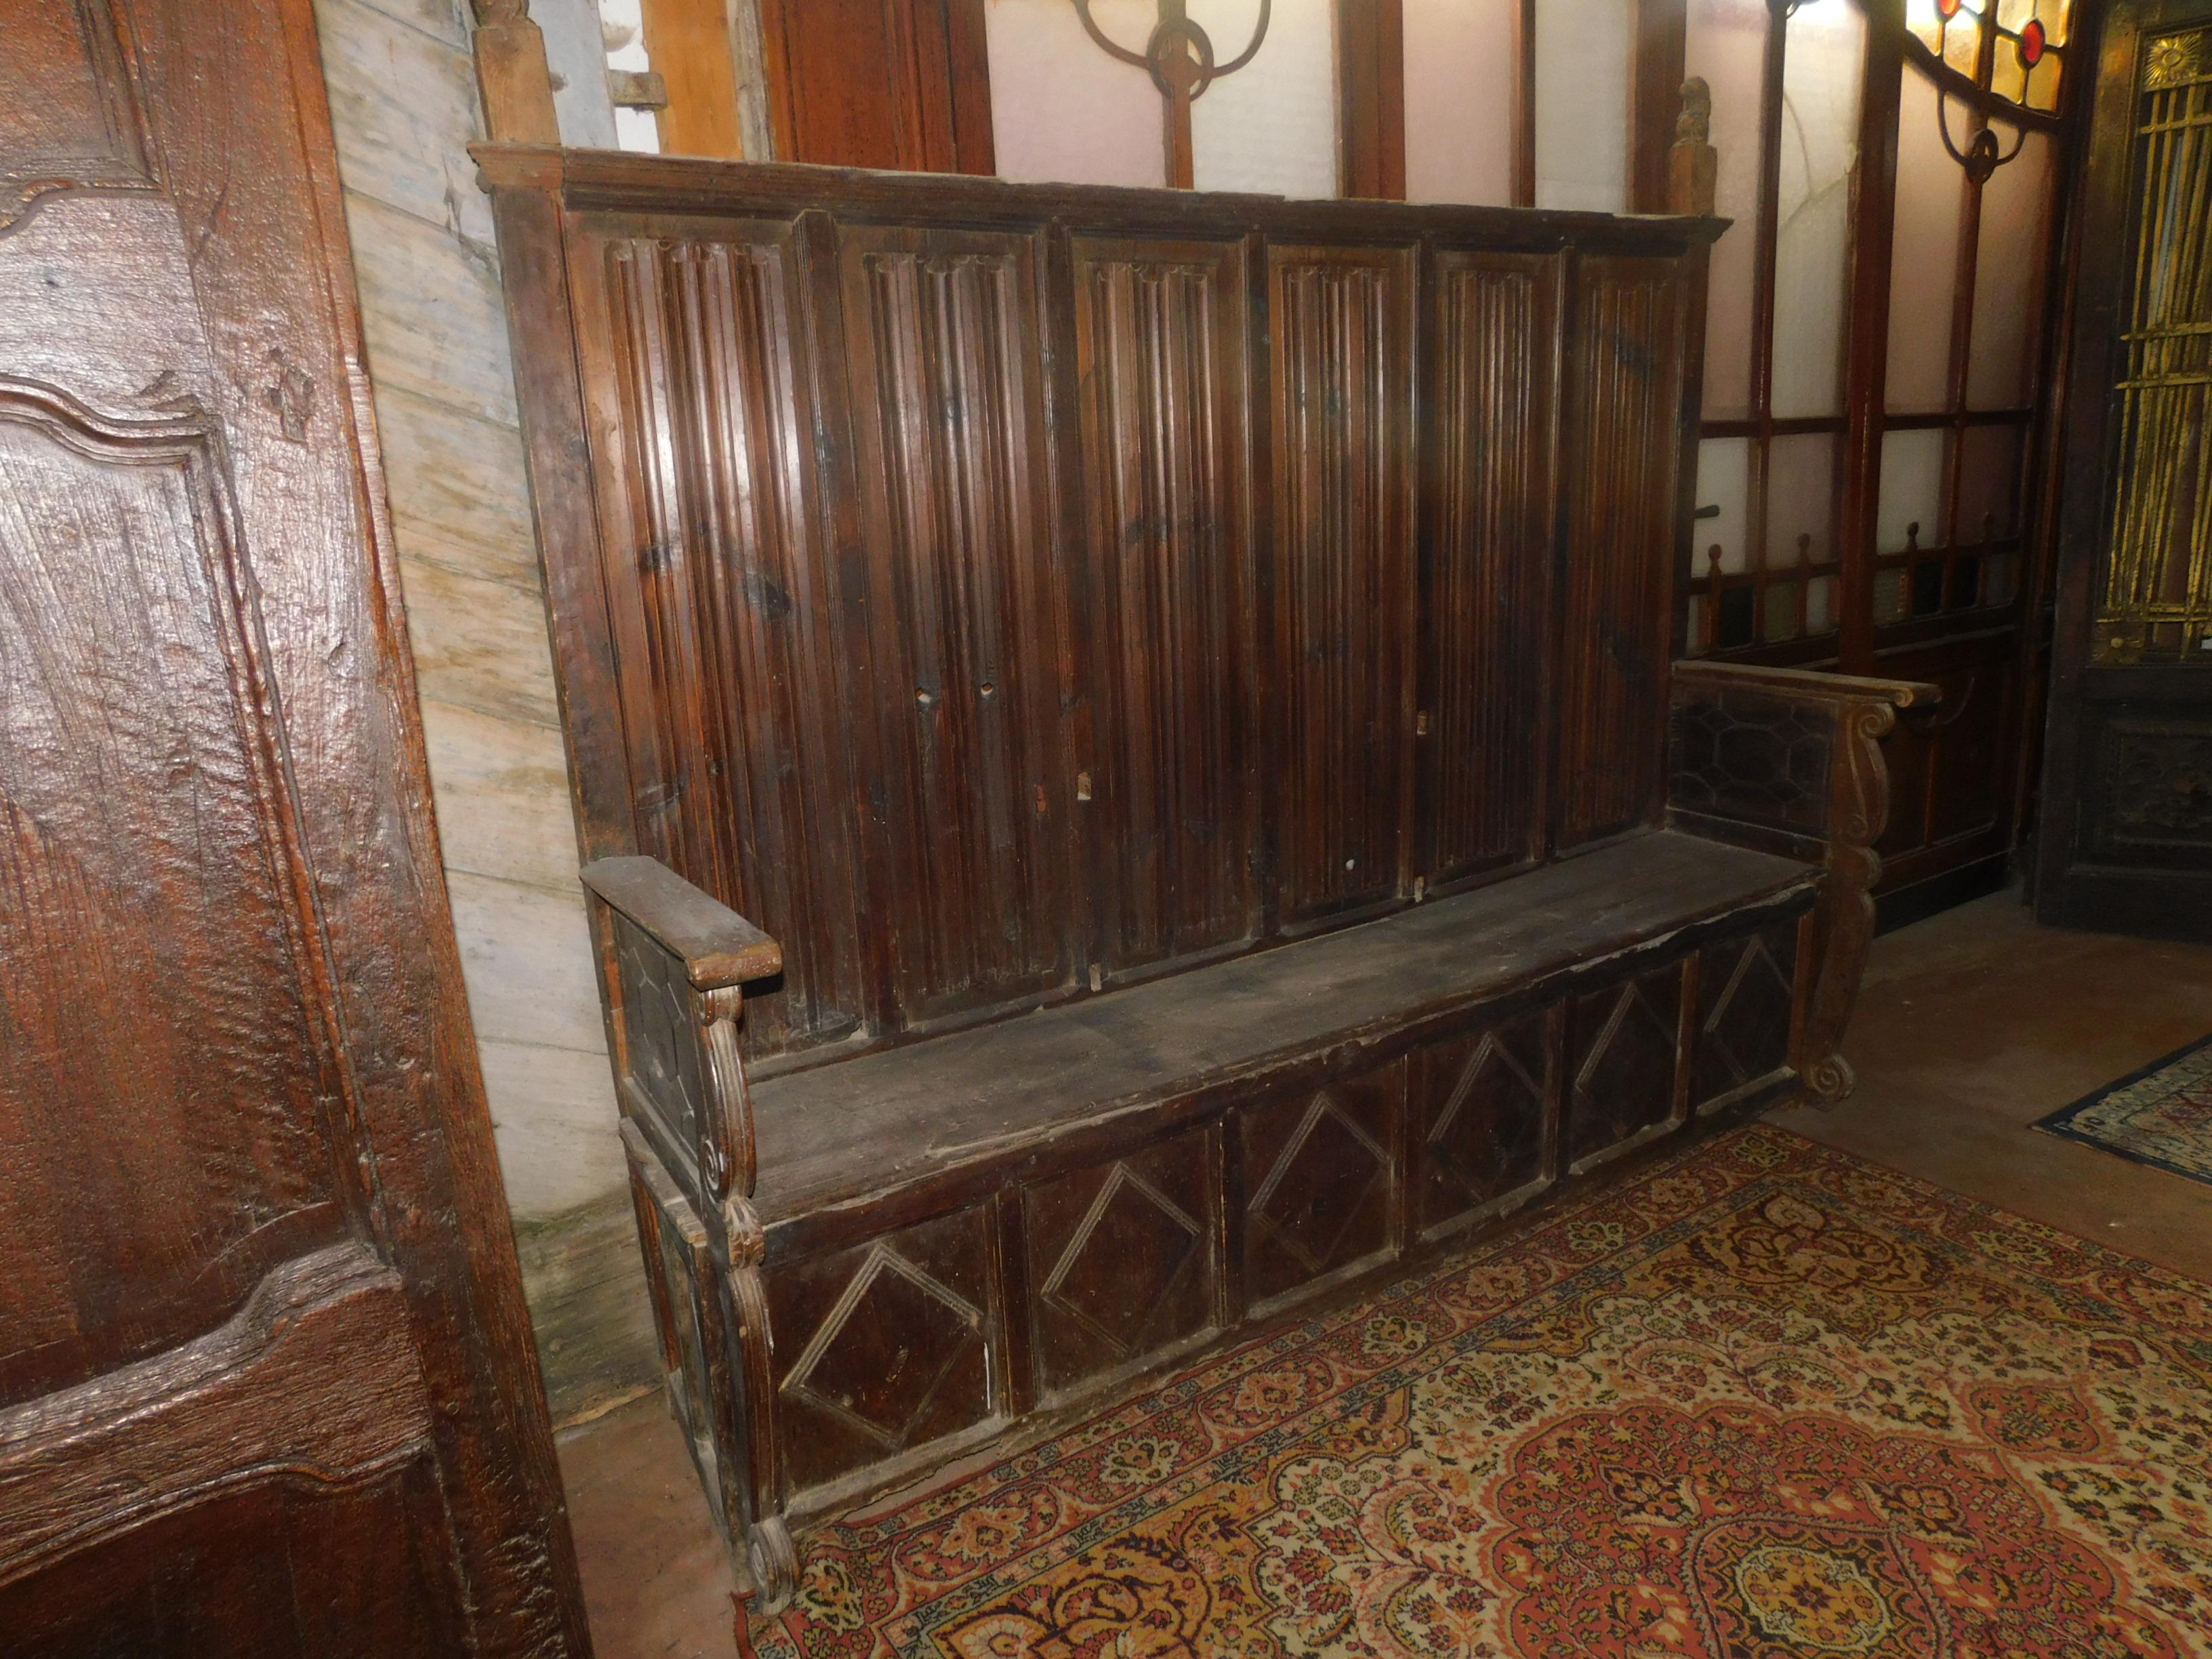 Refectory bench, very old, hand-built in the 16th century by an Italian artist, well preserved for the time, it was paved on the ground.
Very sculpted it belonged to a bishop of northern Italy, in red larch, very charming could give a nice solution